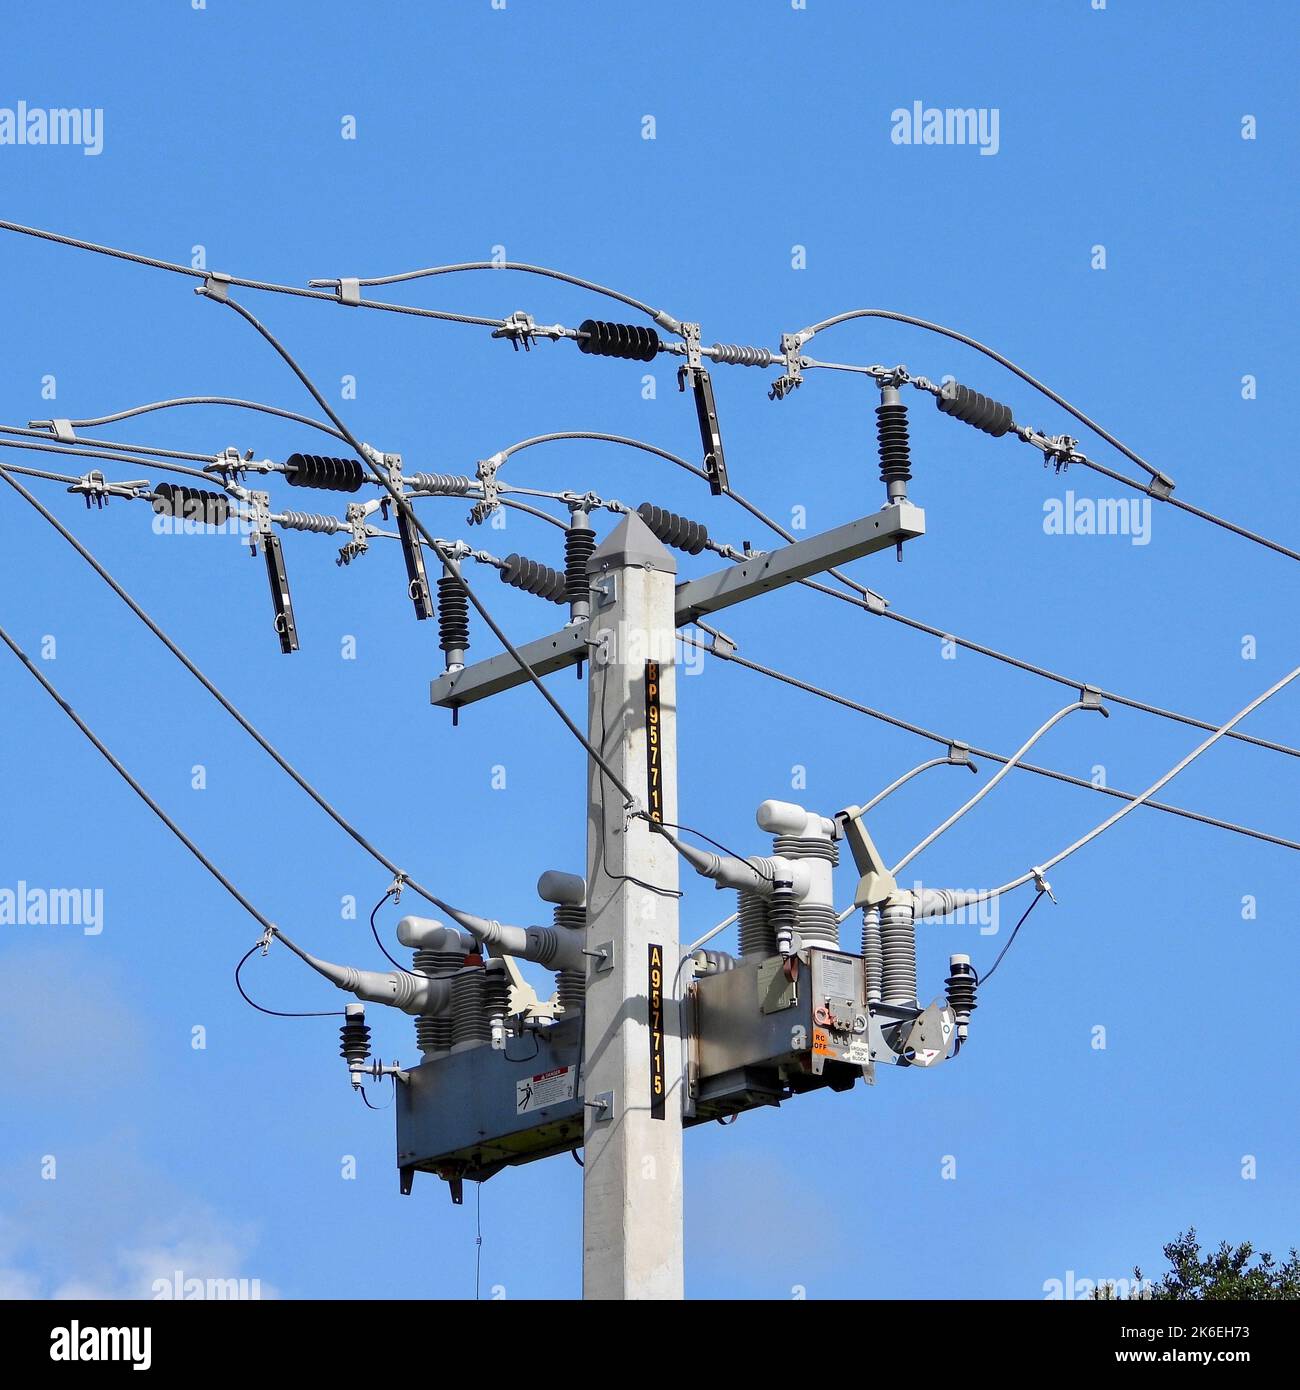 A low angle shot of a power transformer and electrical wires on a metal pole Stock Photo